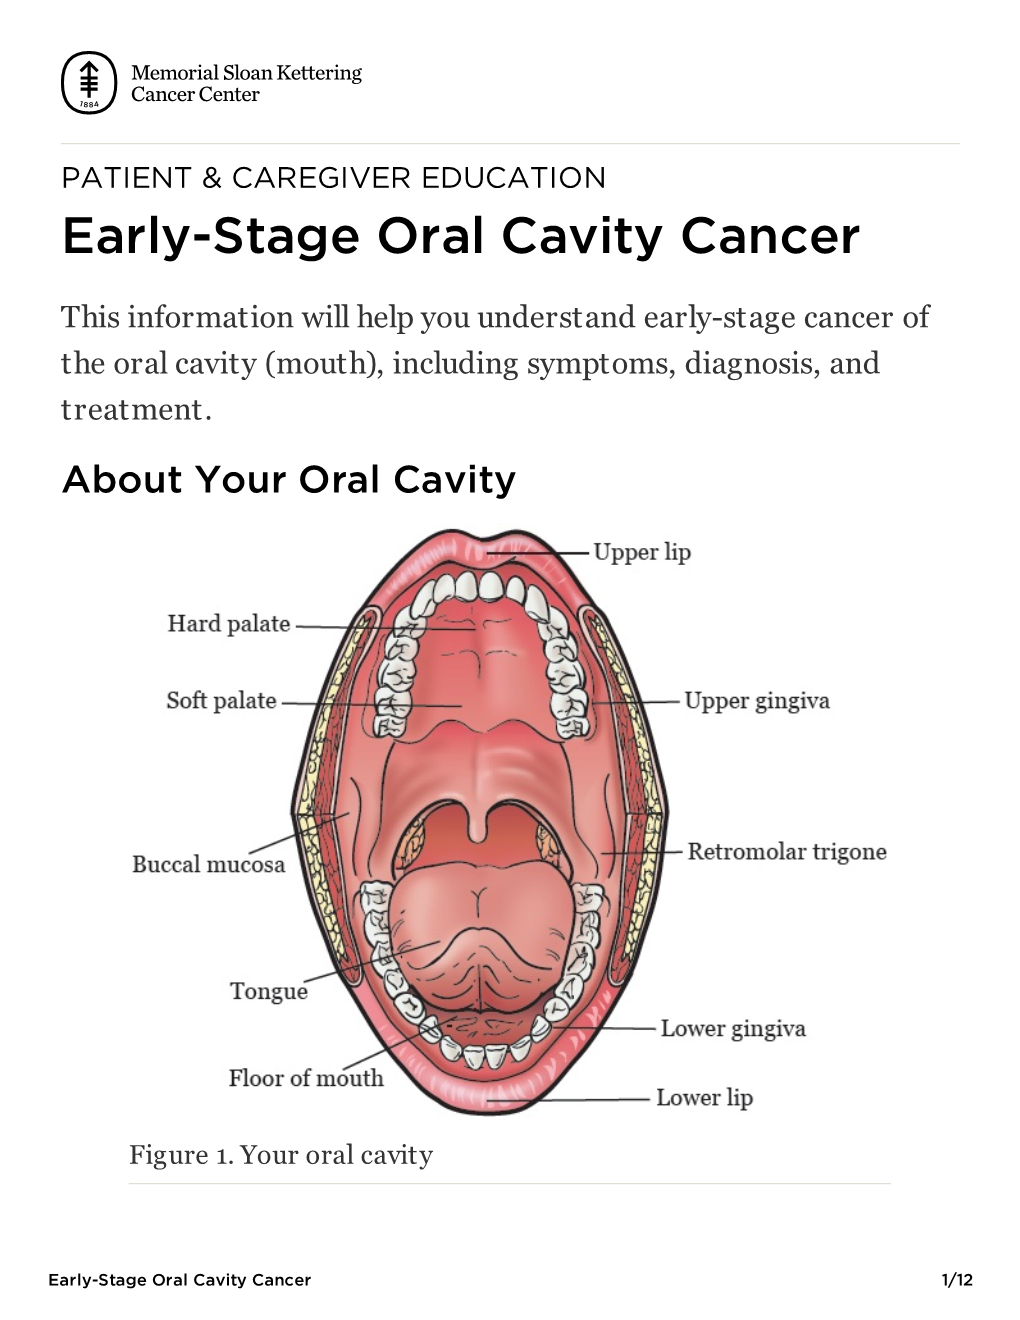 Early-Stage Oral Cavity Cancer